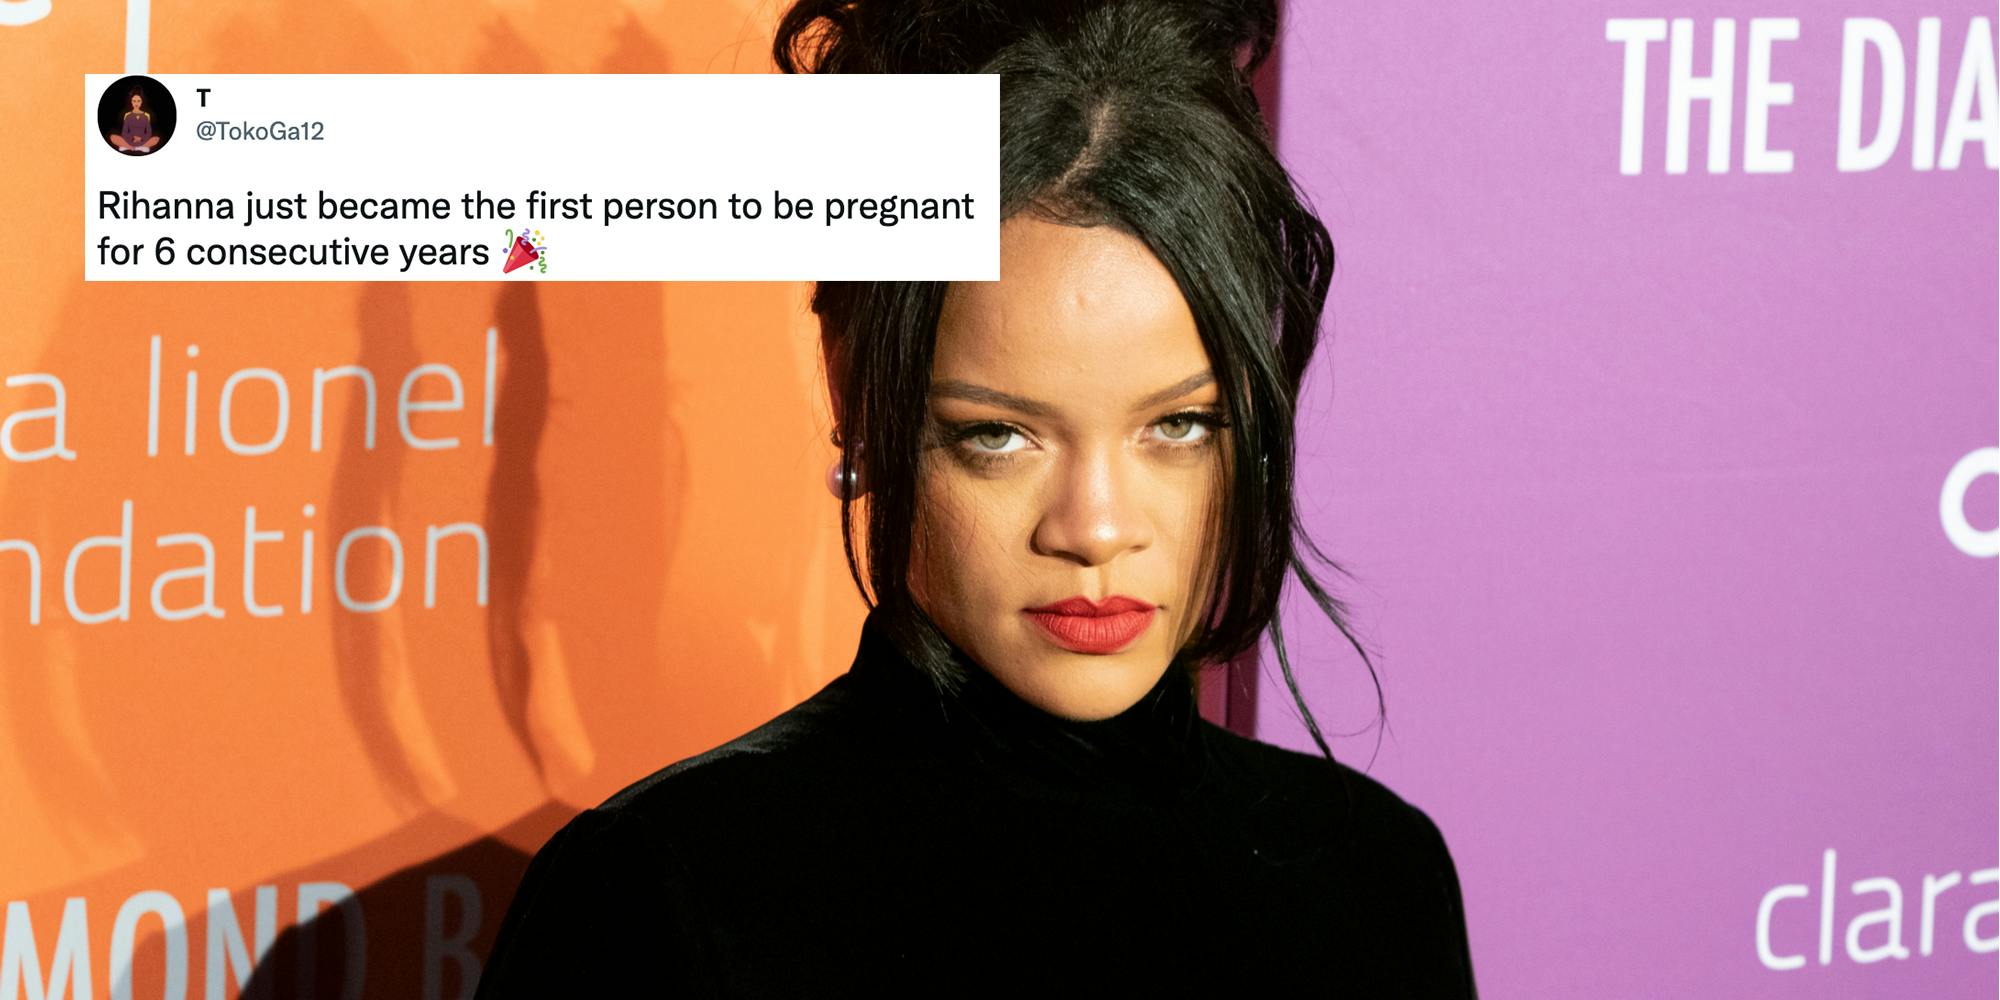 People Are Making Memes About Rumors That Rihanna Is Pregnant